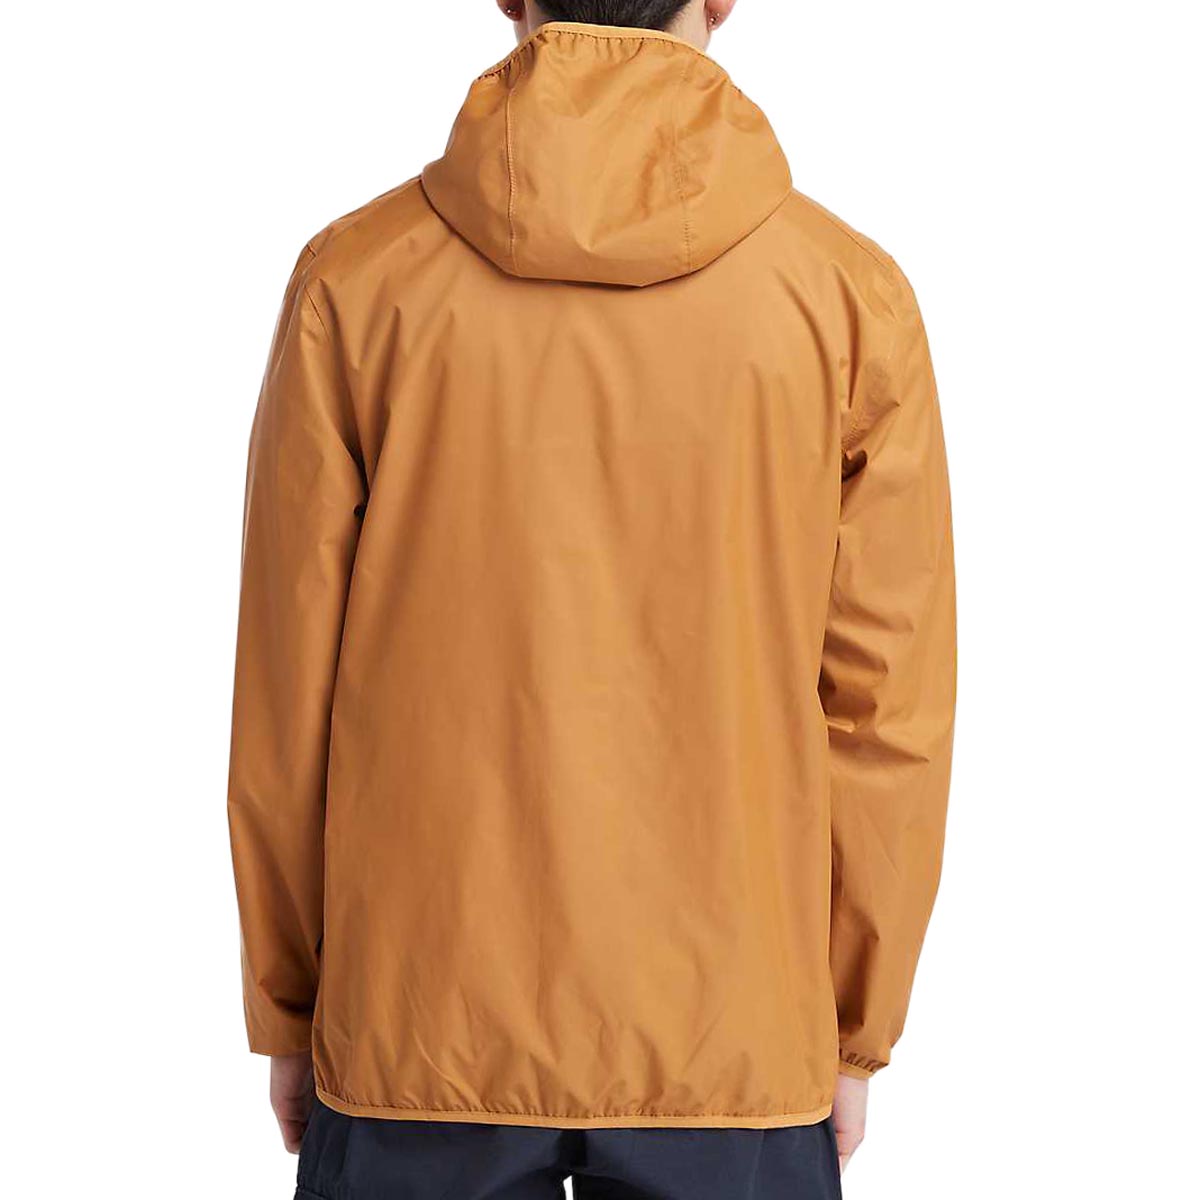 Timberland 2.5l Wind Resistant Jacket - Wheat image 2